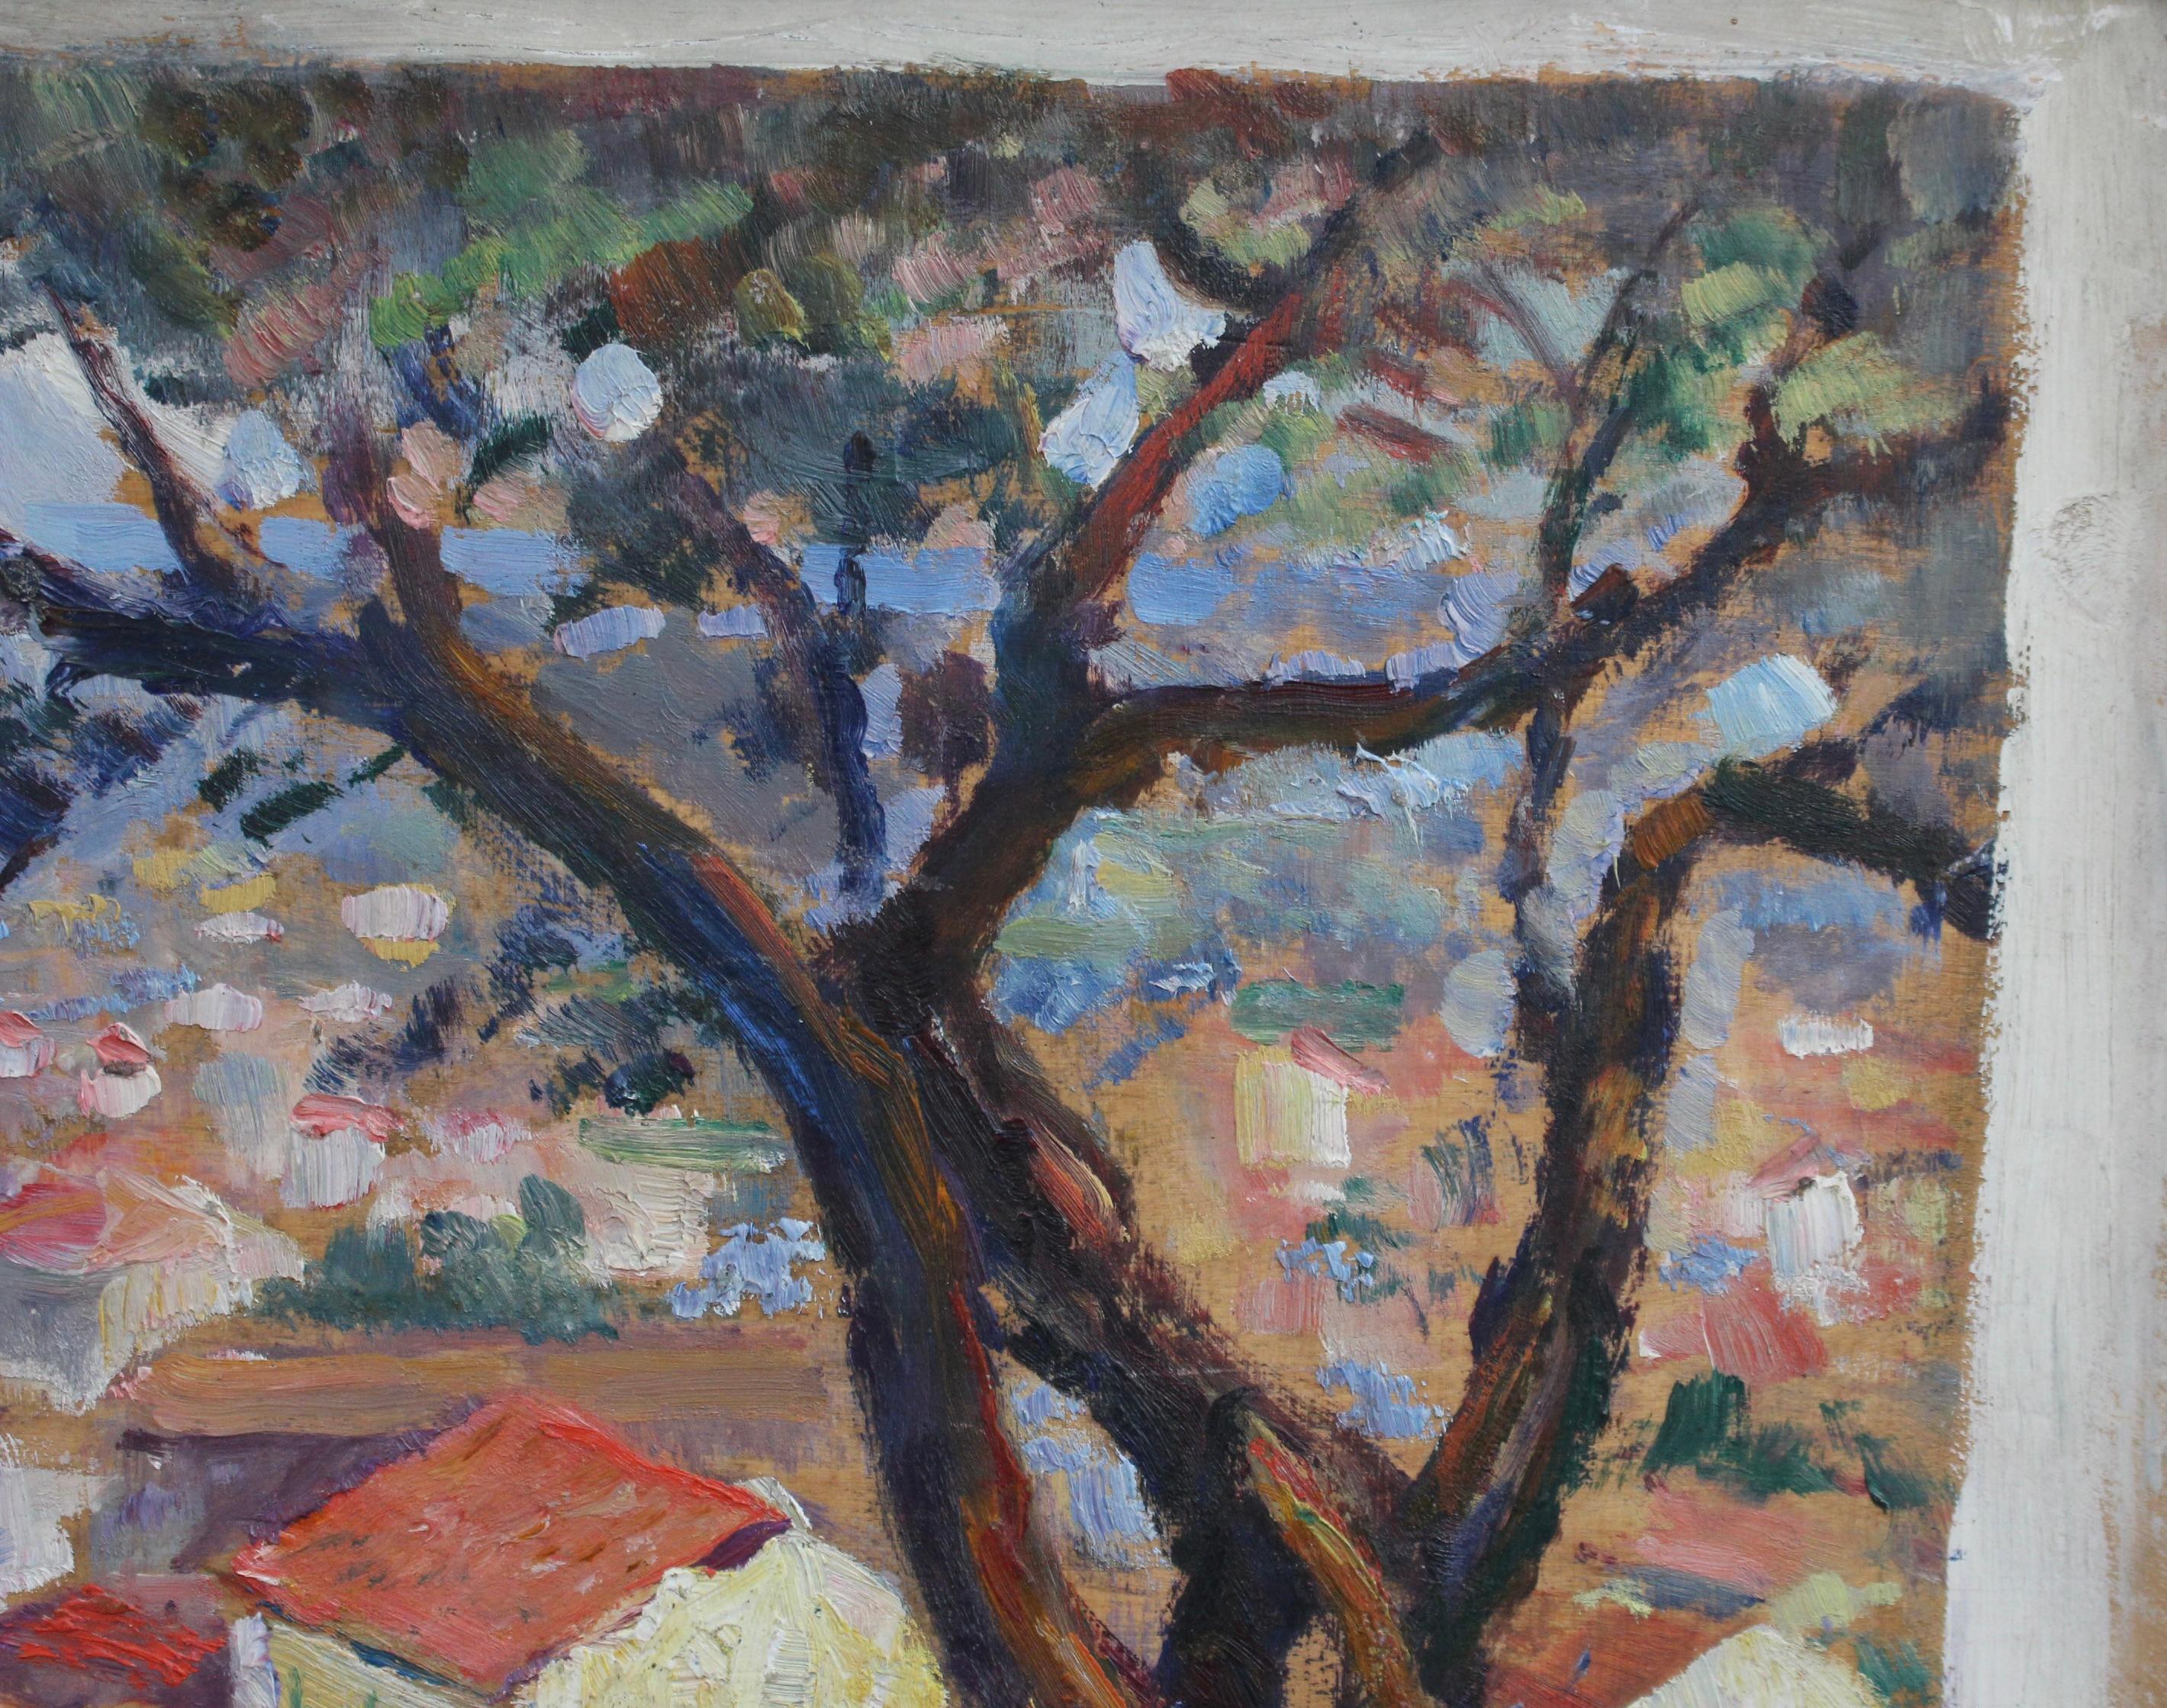 'French Riviera View', oil on wood, French School (circa 1950s). Discovered in the South of France, this charming oil painting depicts one of the small coastal village towns of the Riviera - it may be St. Tropez. The image transports the viewer to